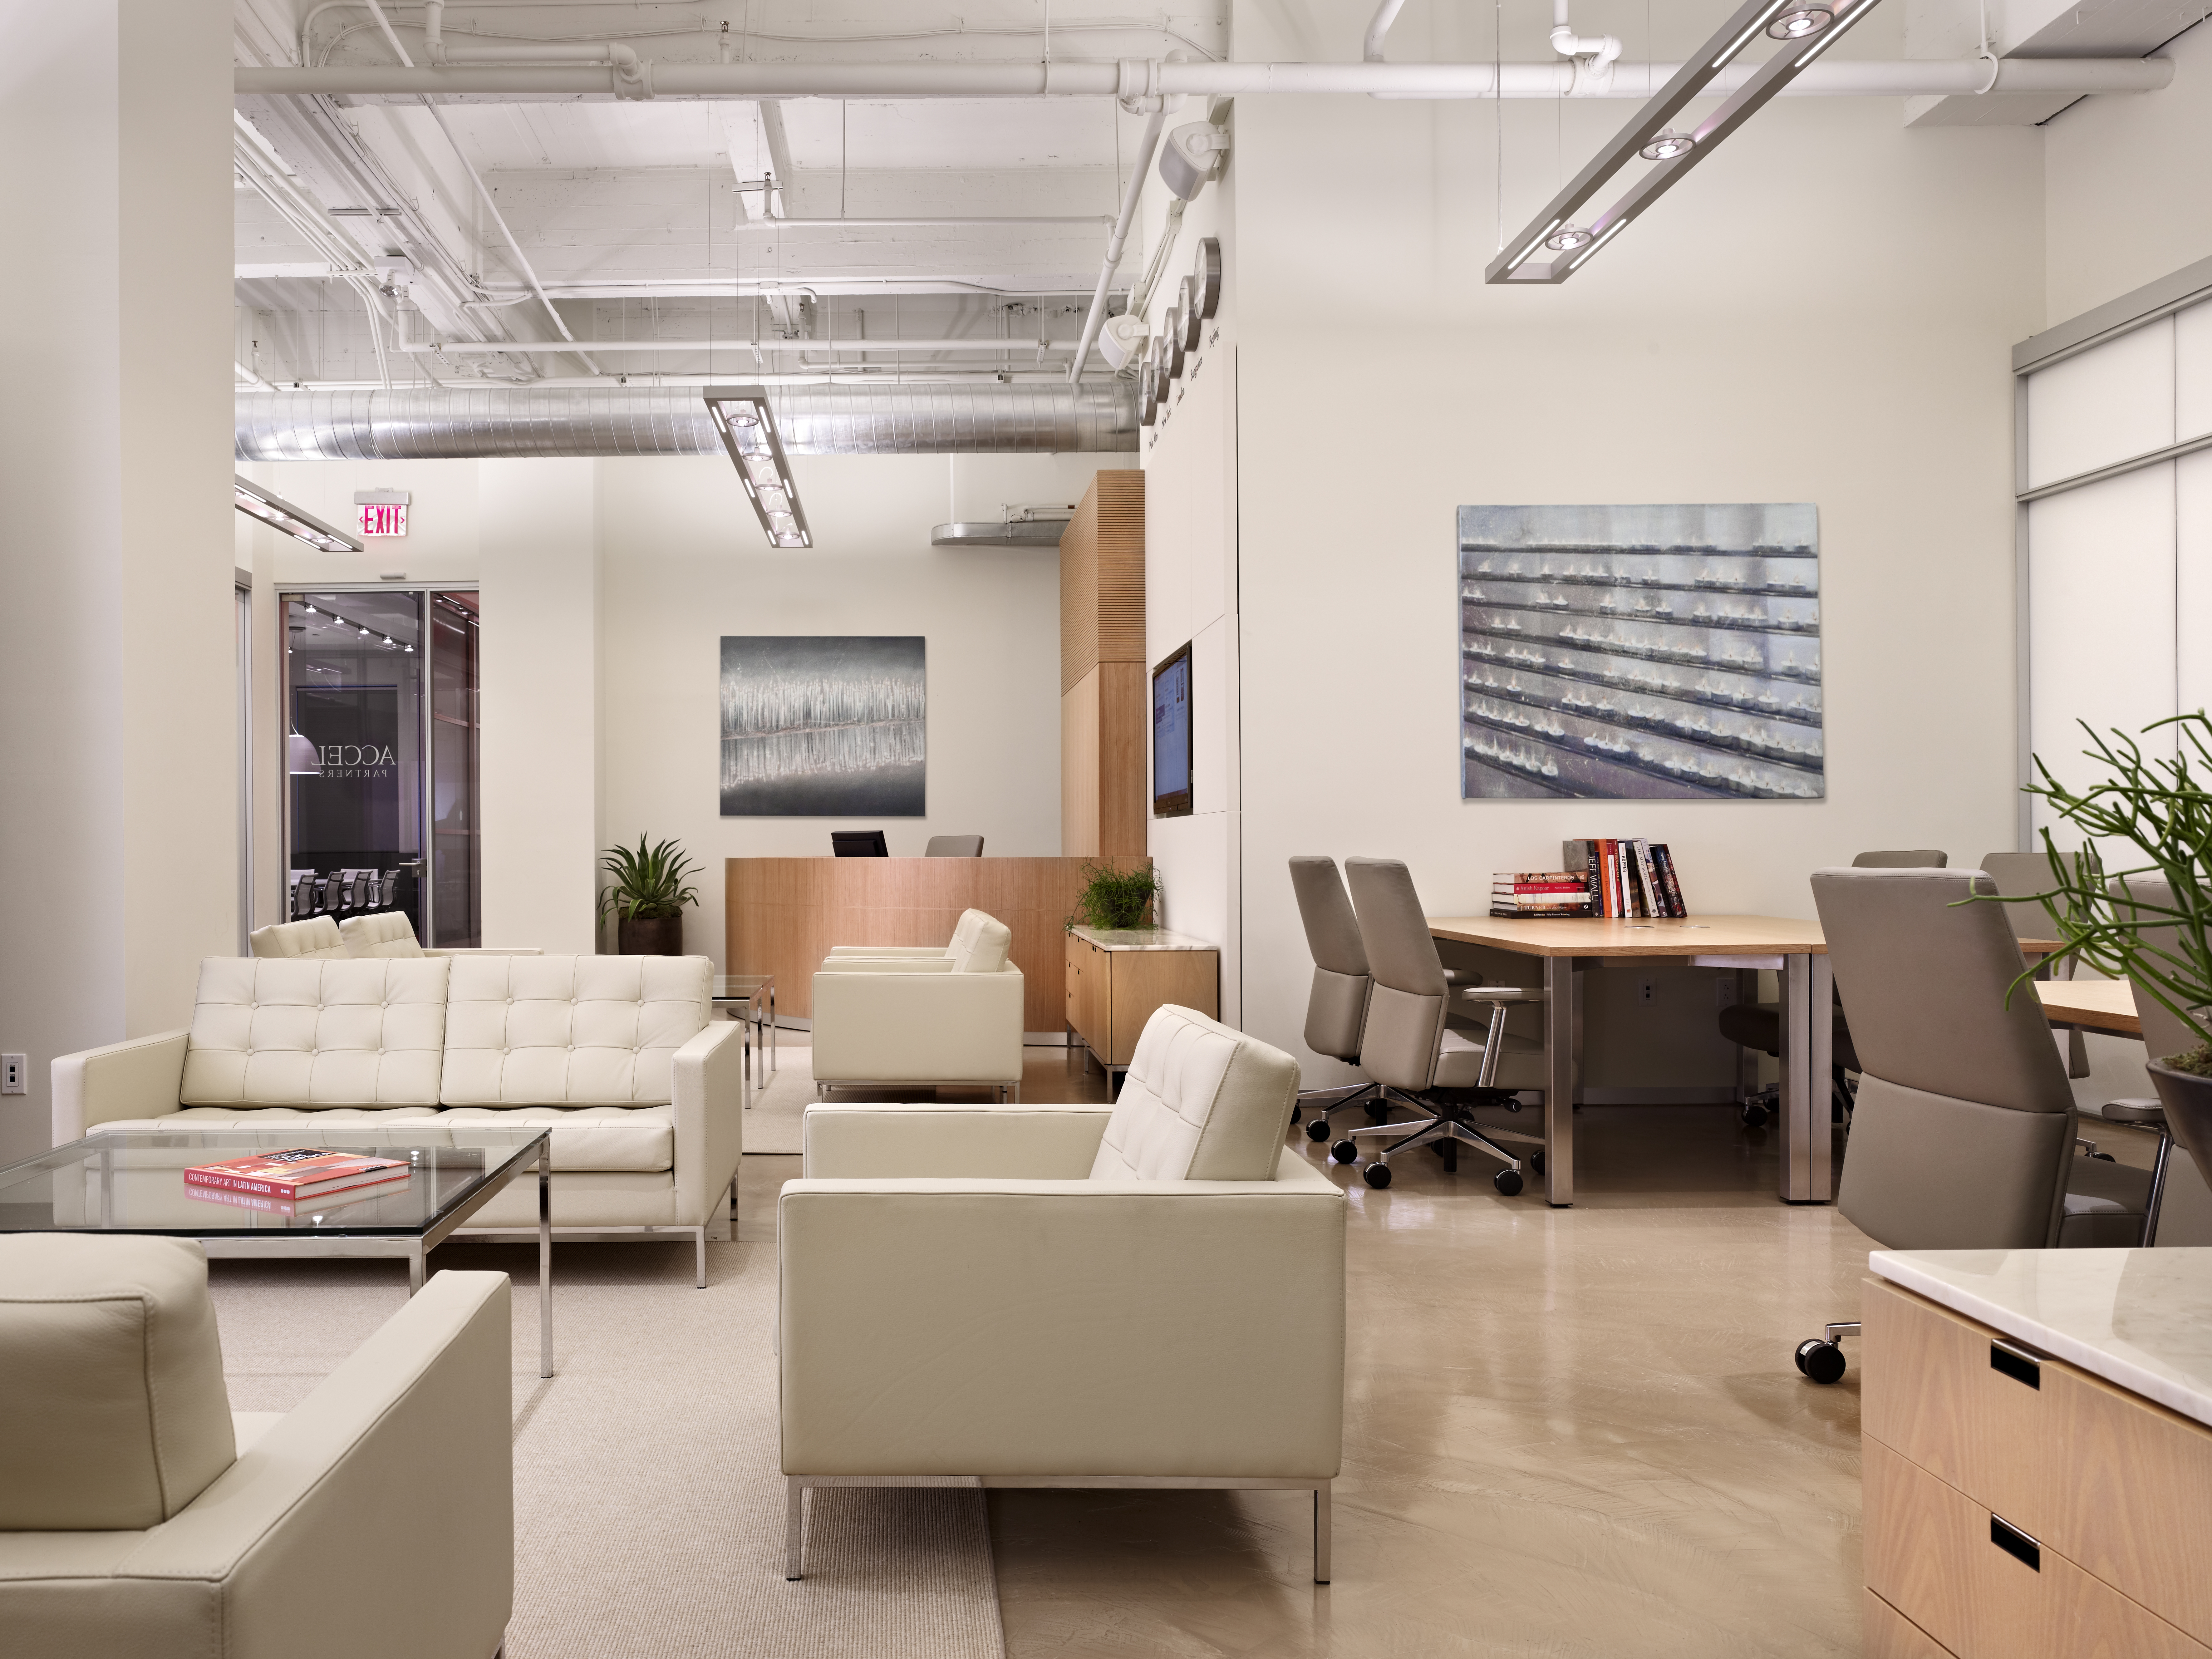 Talisen Construction Corporation: Construction Management and General Contractor. Accel Partners, 111 Eighth Avenue, New York. Community work area with couch and table area on the left and worktables and chairs on the right.